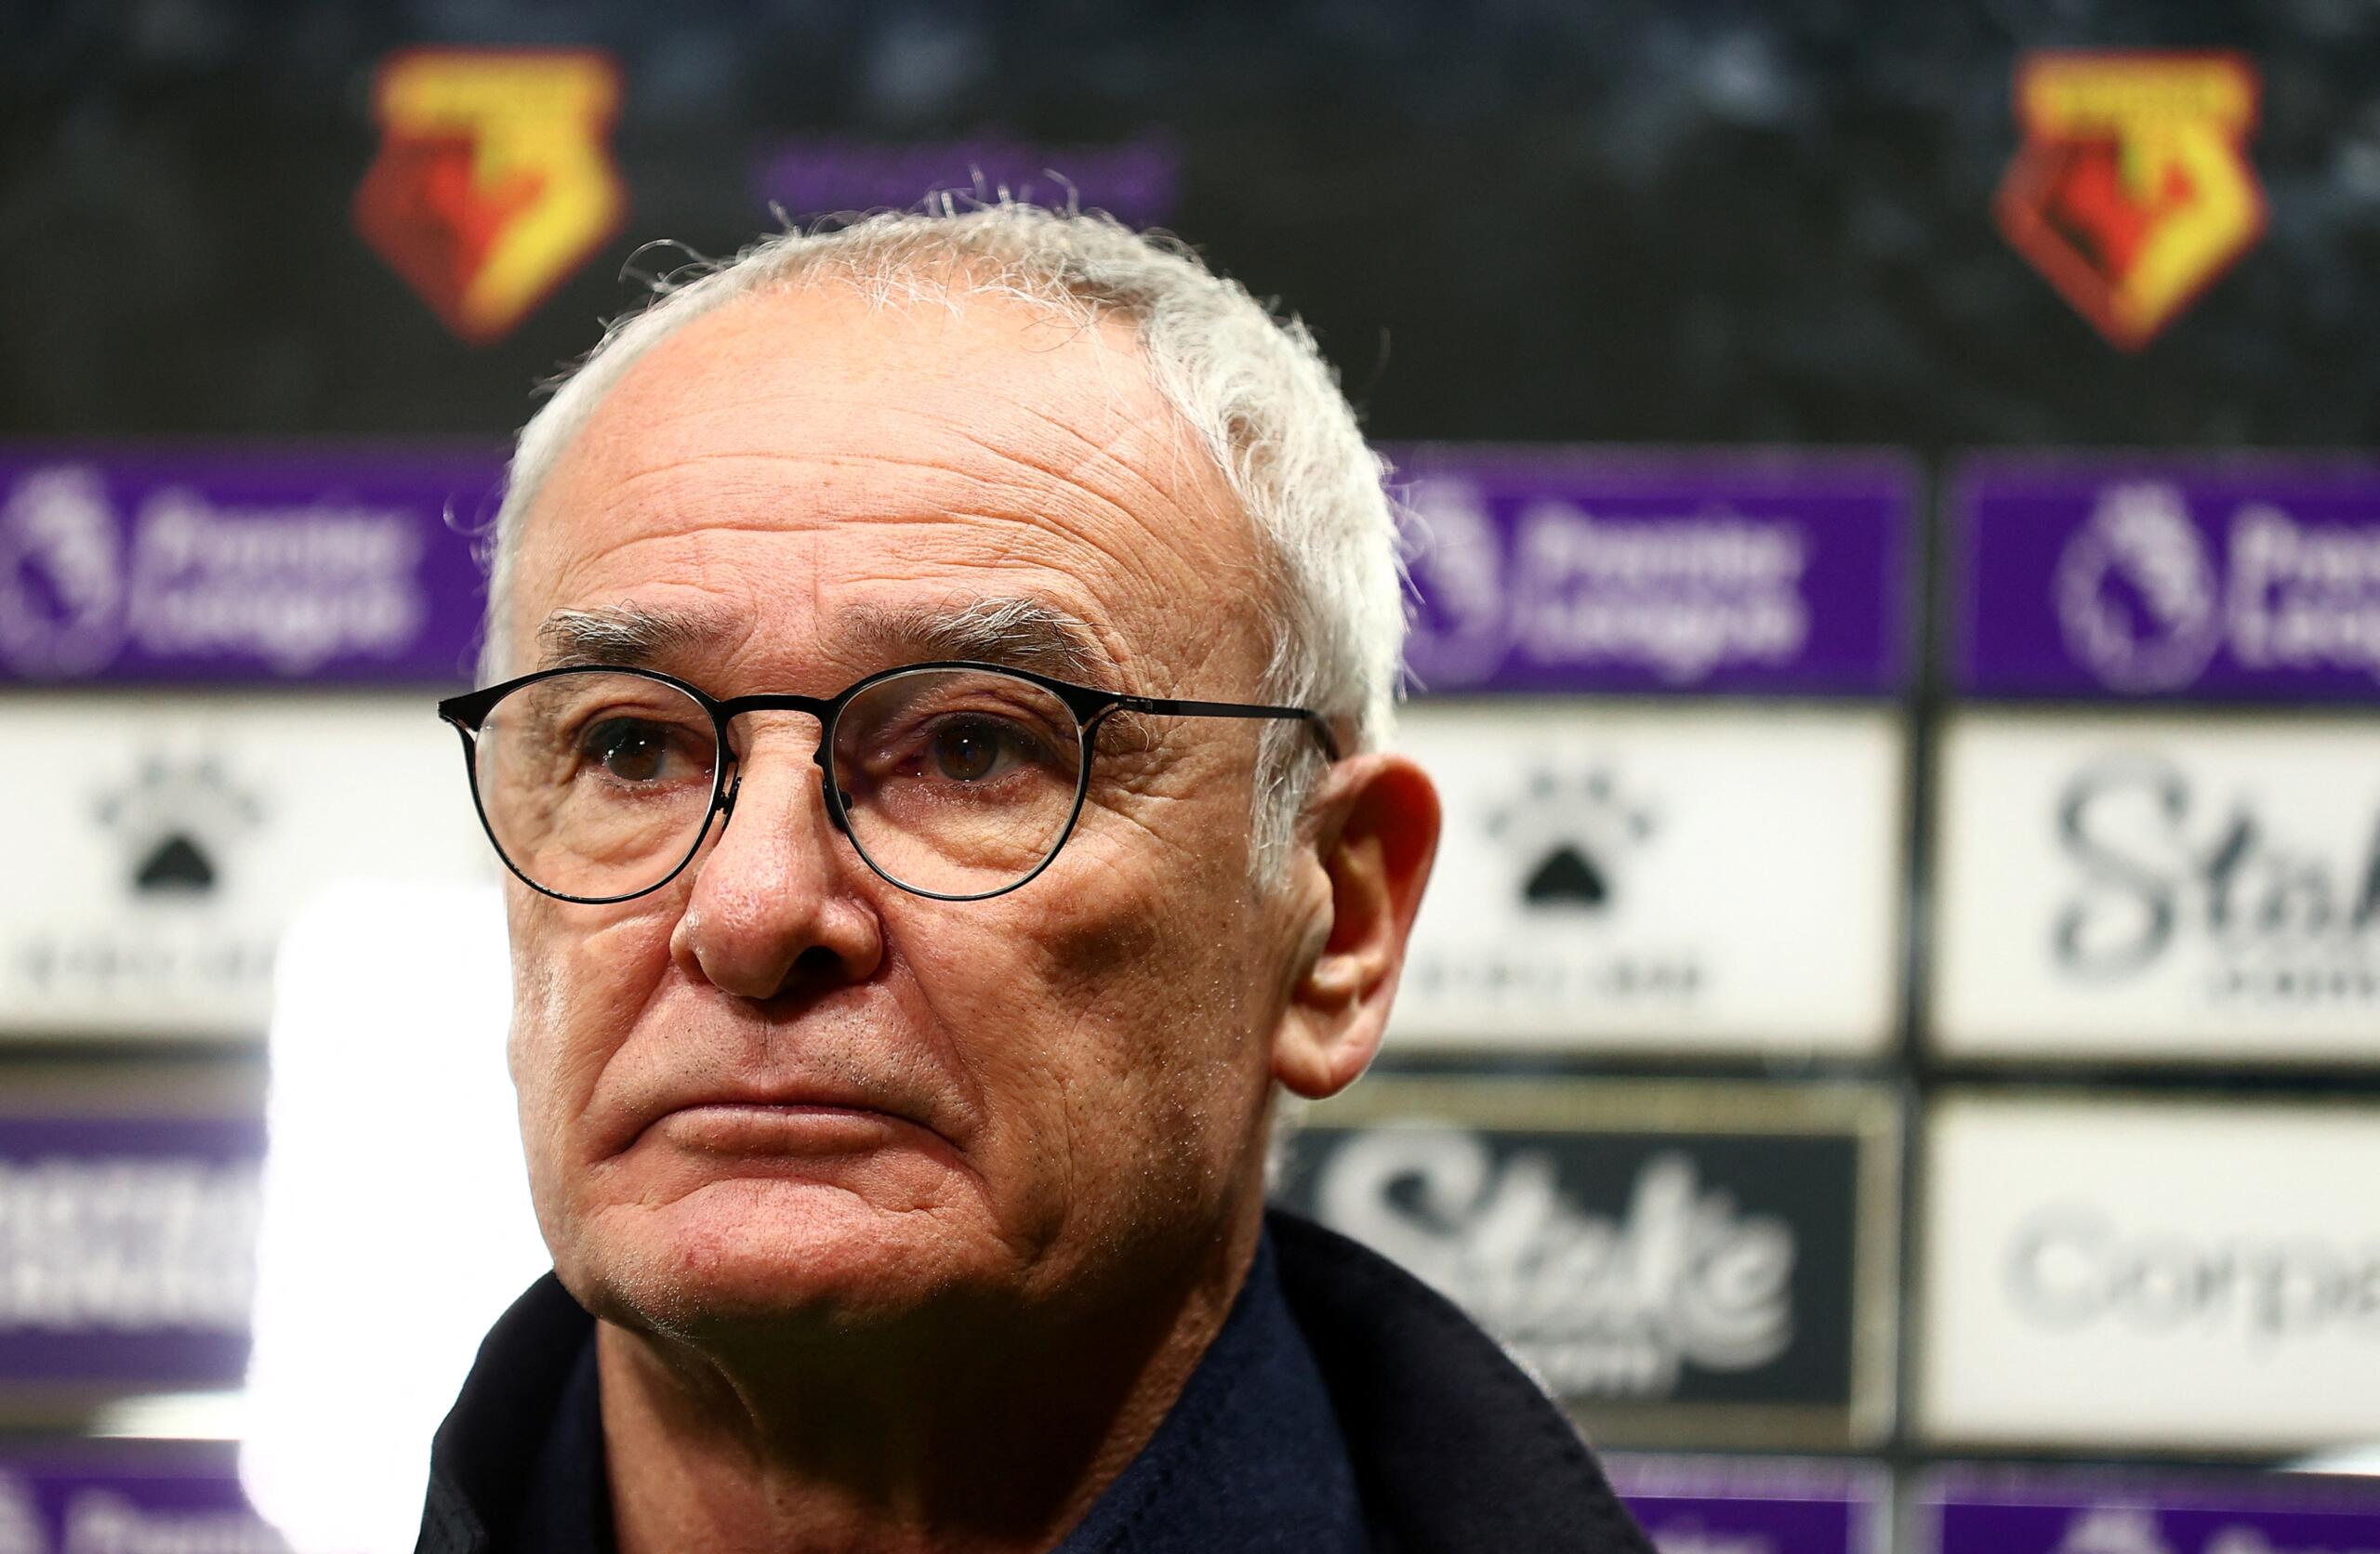 Ranieri helped Juventus escape the clutches of Serie B following Calciopoli, leading them back to Serie A at the end of the 2000s.